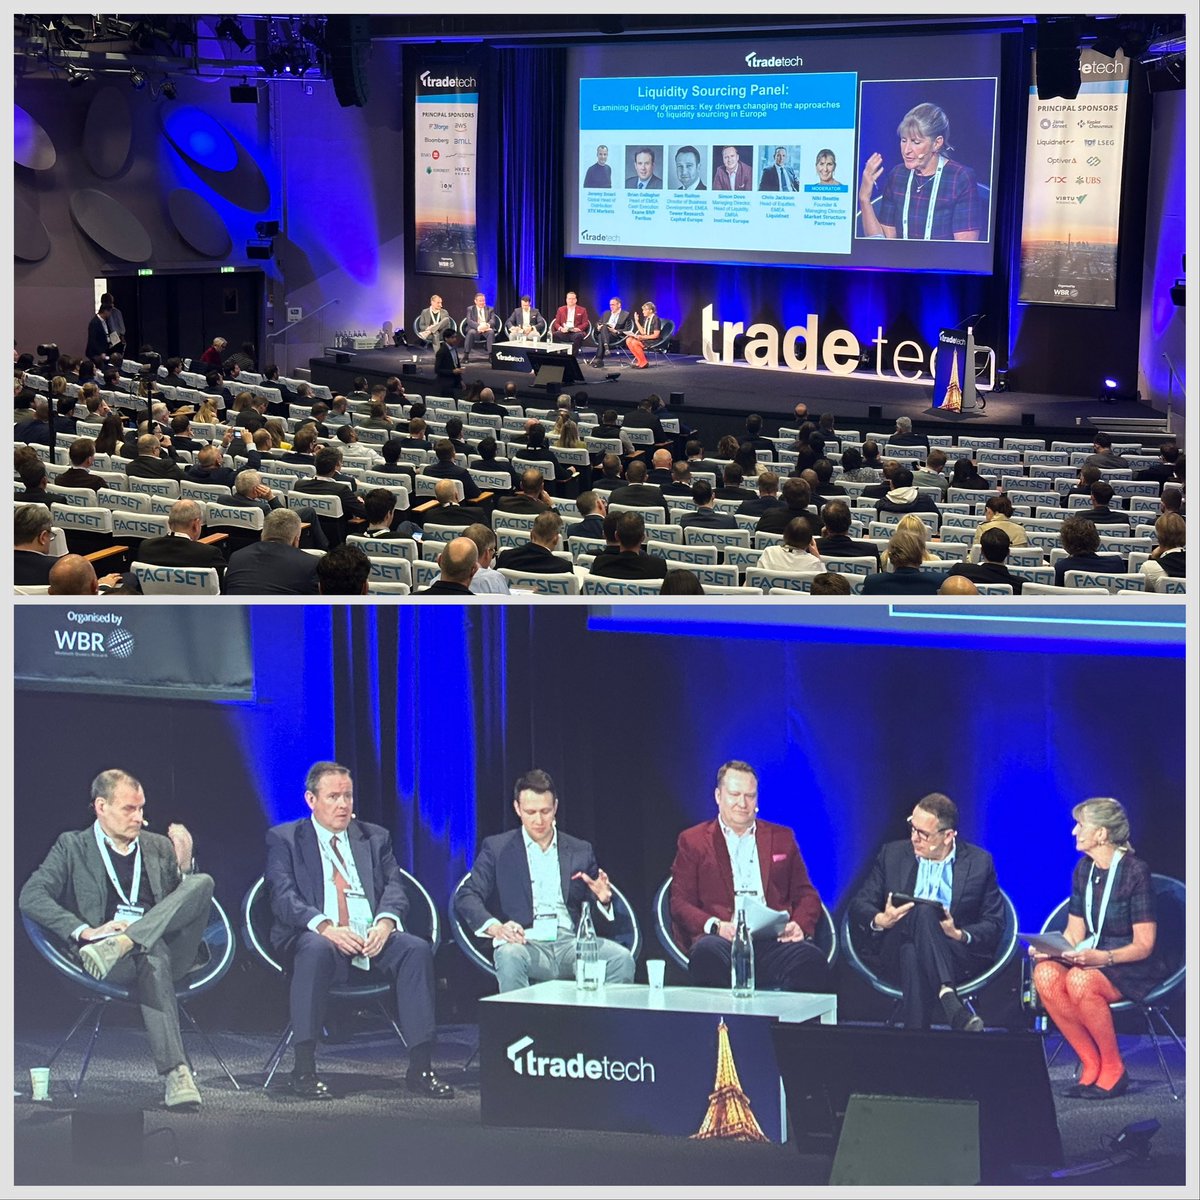 Great panel @TradeTech on what’s driving liquidity sourcing, liquidity / price discovery and more! With Jeremy Smart @xtxmarkets; Brian Gallagher @BNPParibas; Sam Railton Tower Research Capital; Simon Dove @Instinet; Chris Jackson @Liquidnet; Valerie Noel @SYZ_Group #tradetech